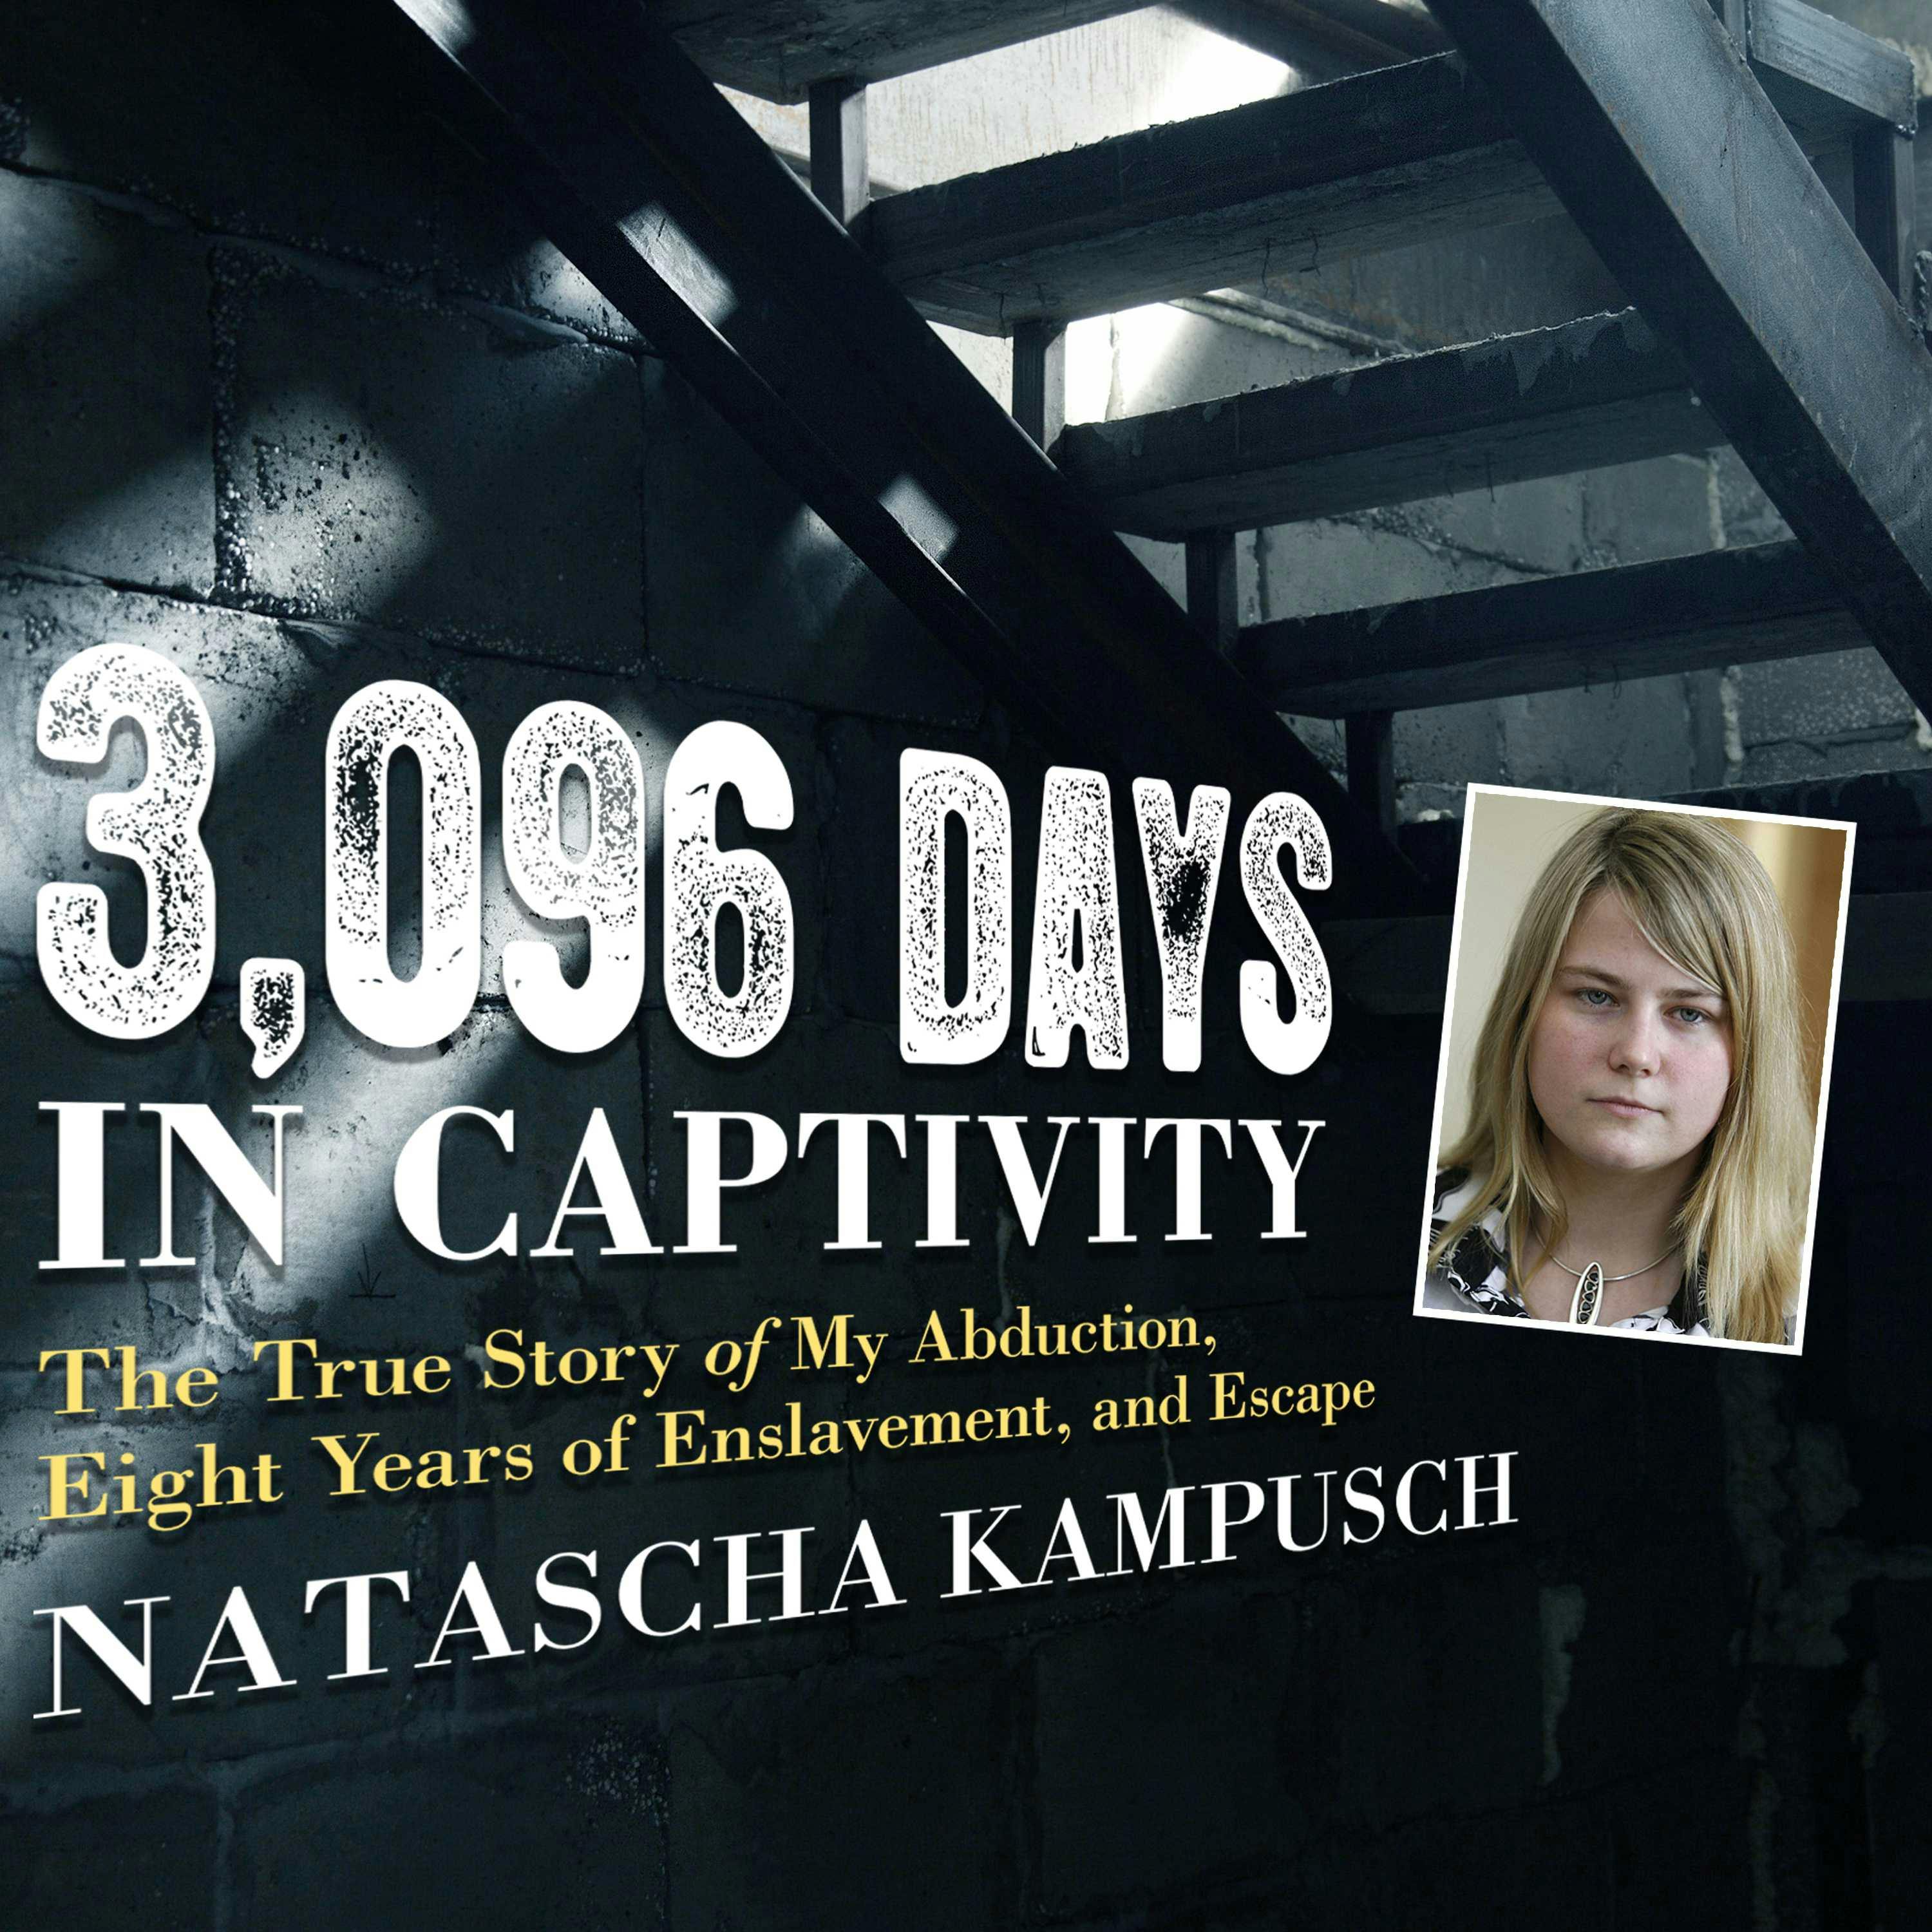 3,096 Days in Captivity: The True Story of My Abduction, Eight Years of Enslavement, and Escape - Natascha Kampusch